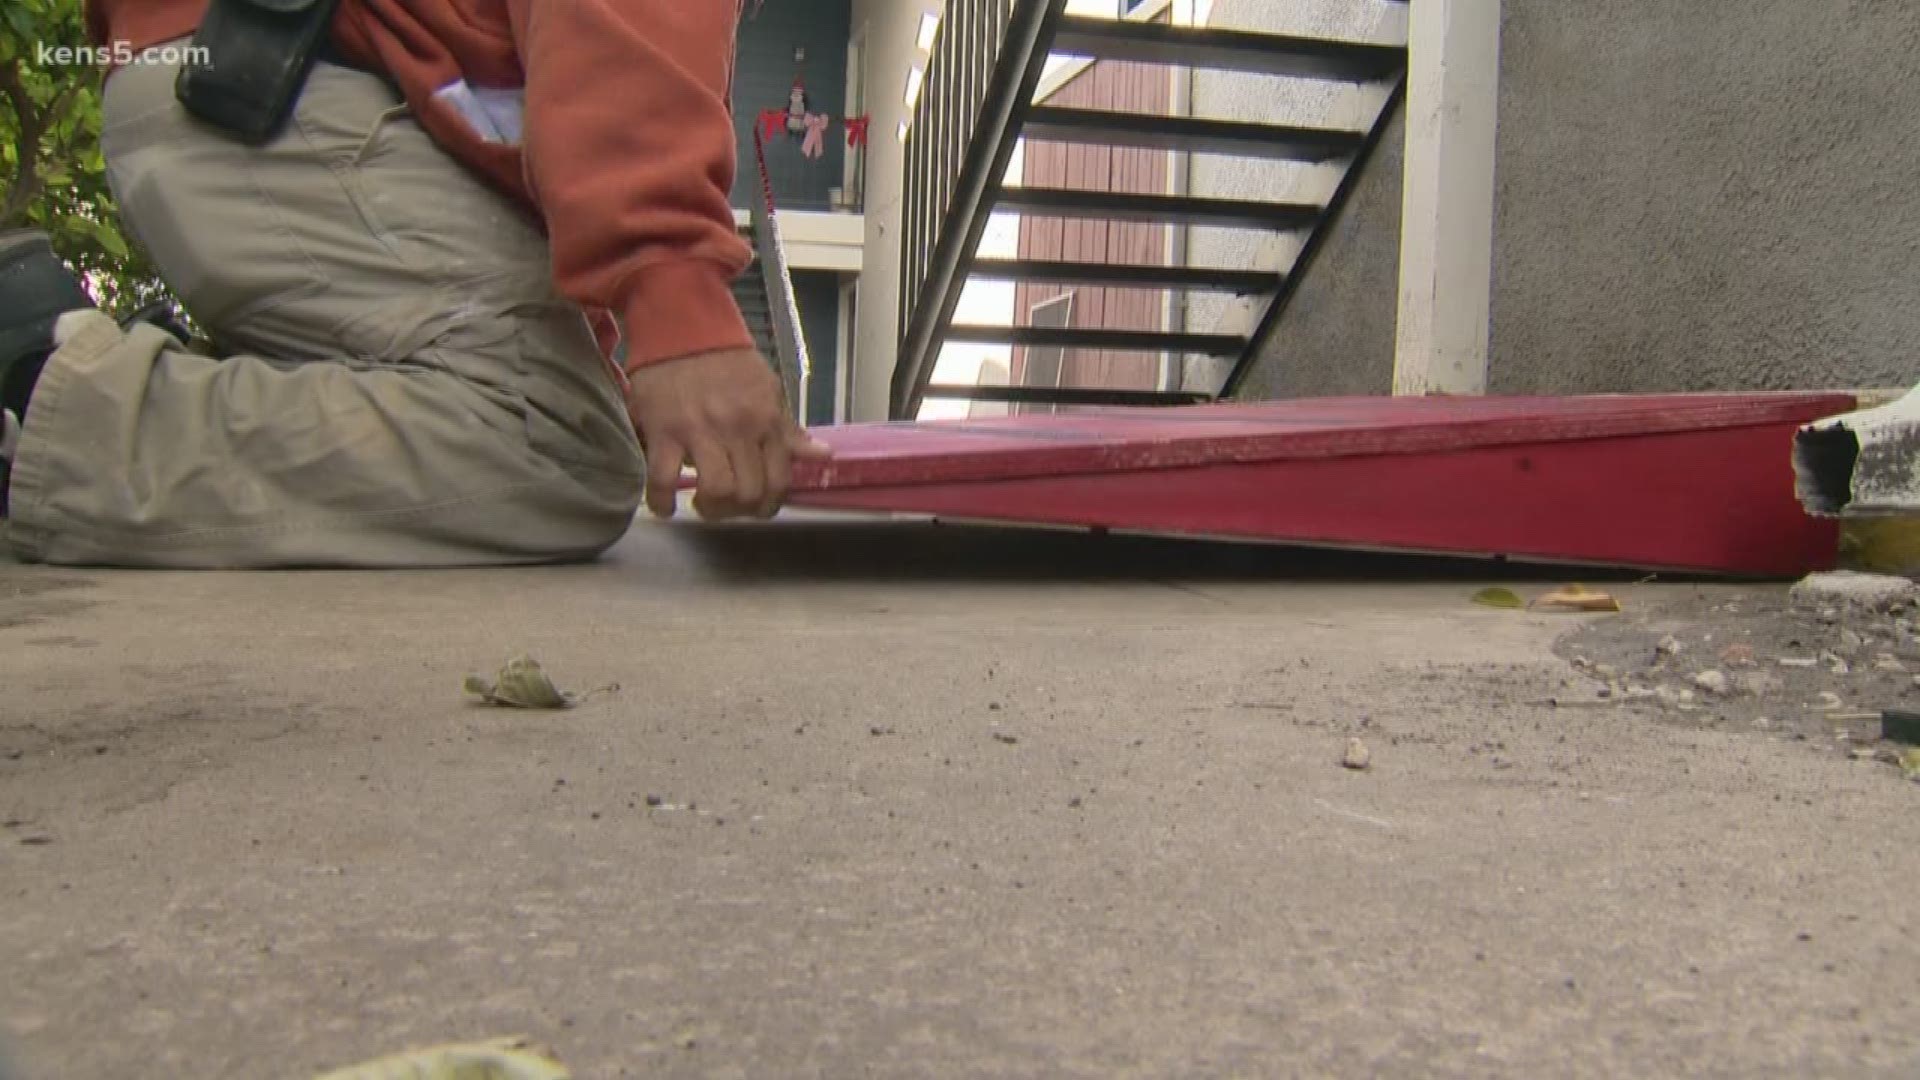 A major act of kindness from a San Antonio handyman who came to the rescue of two sisters stuck inside their home. Their wheelchair ramps were stolen on Thanksgiving. They hadn't been able to leave their apartment until this afternoon.